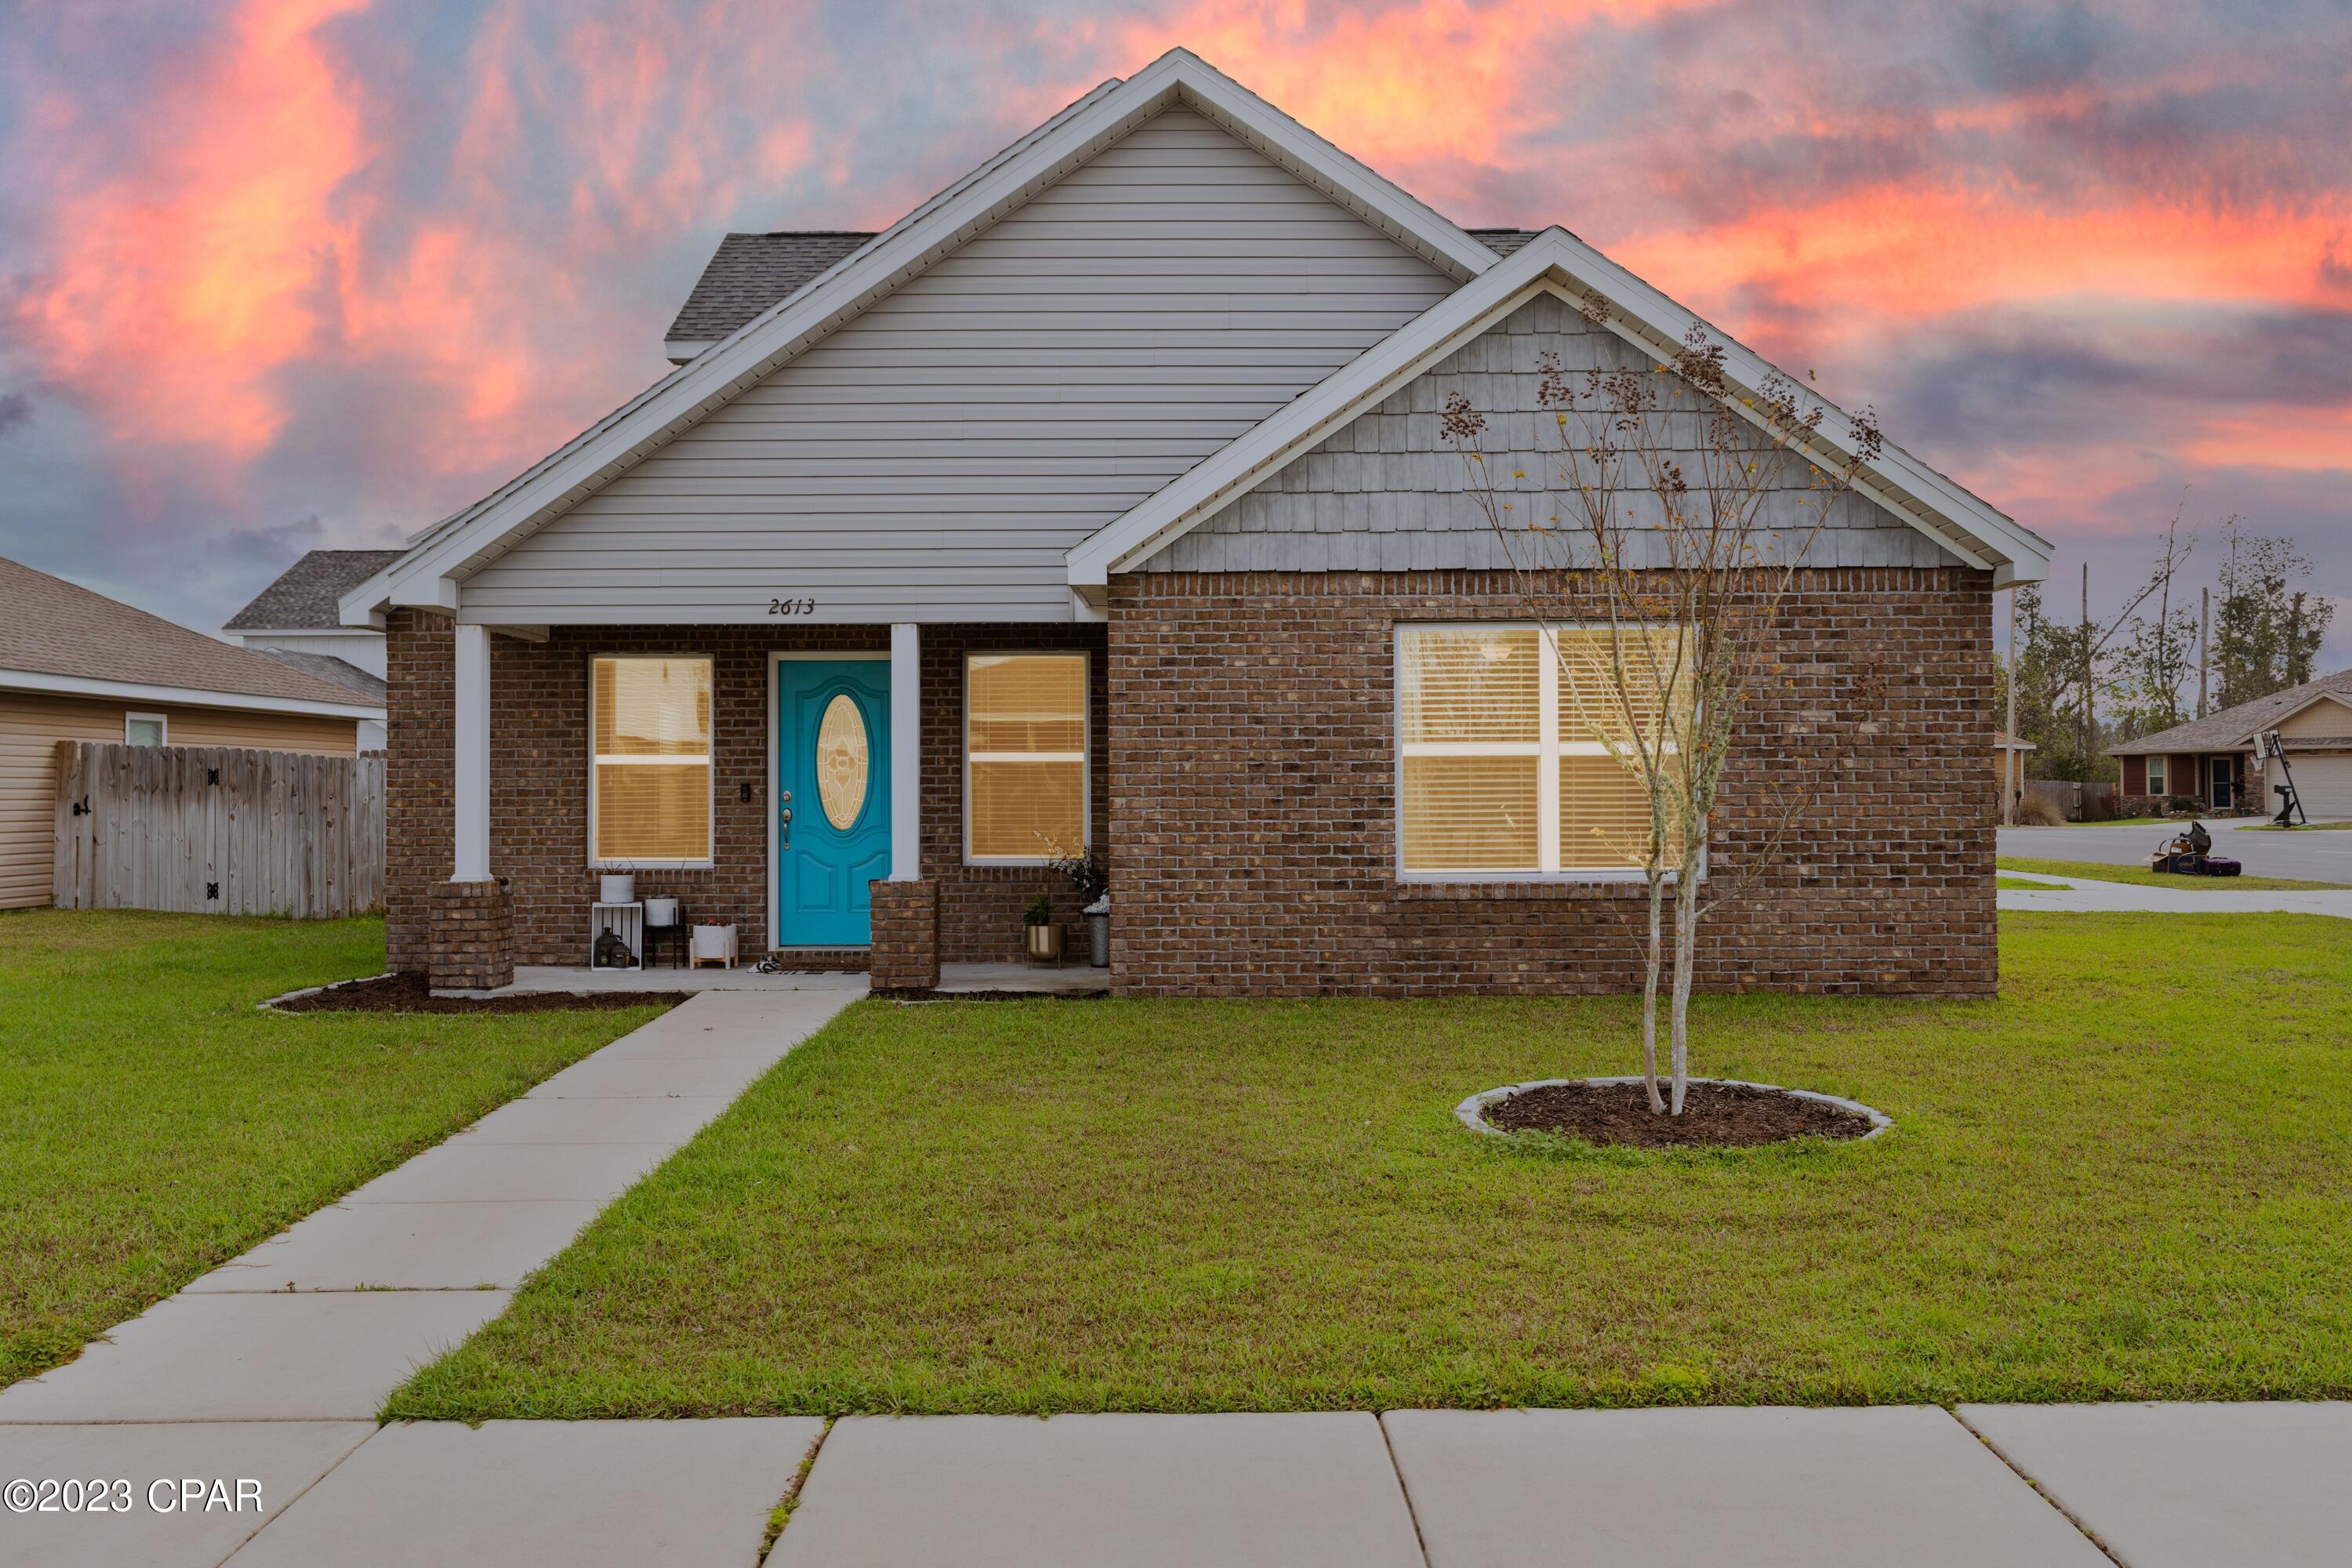 Homes for sale in Panama City | View 2613 Paige Circle | 3 Beds, 2 Baths